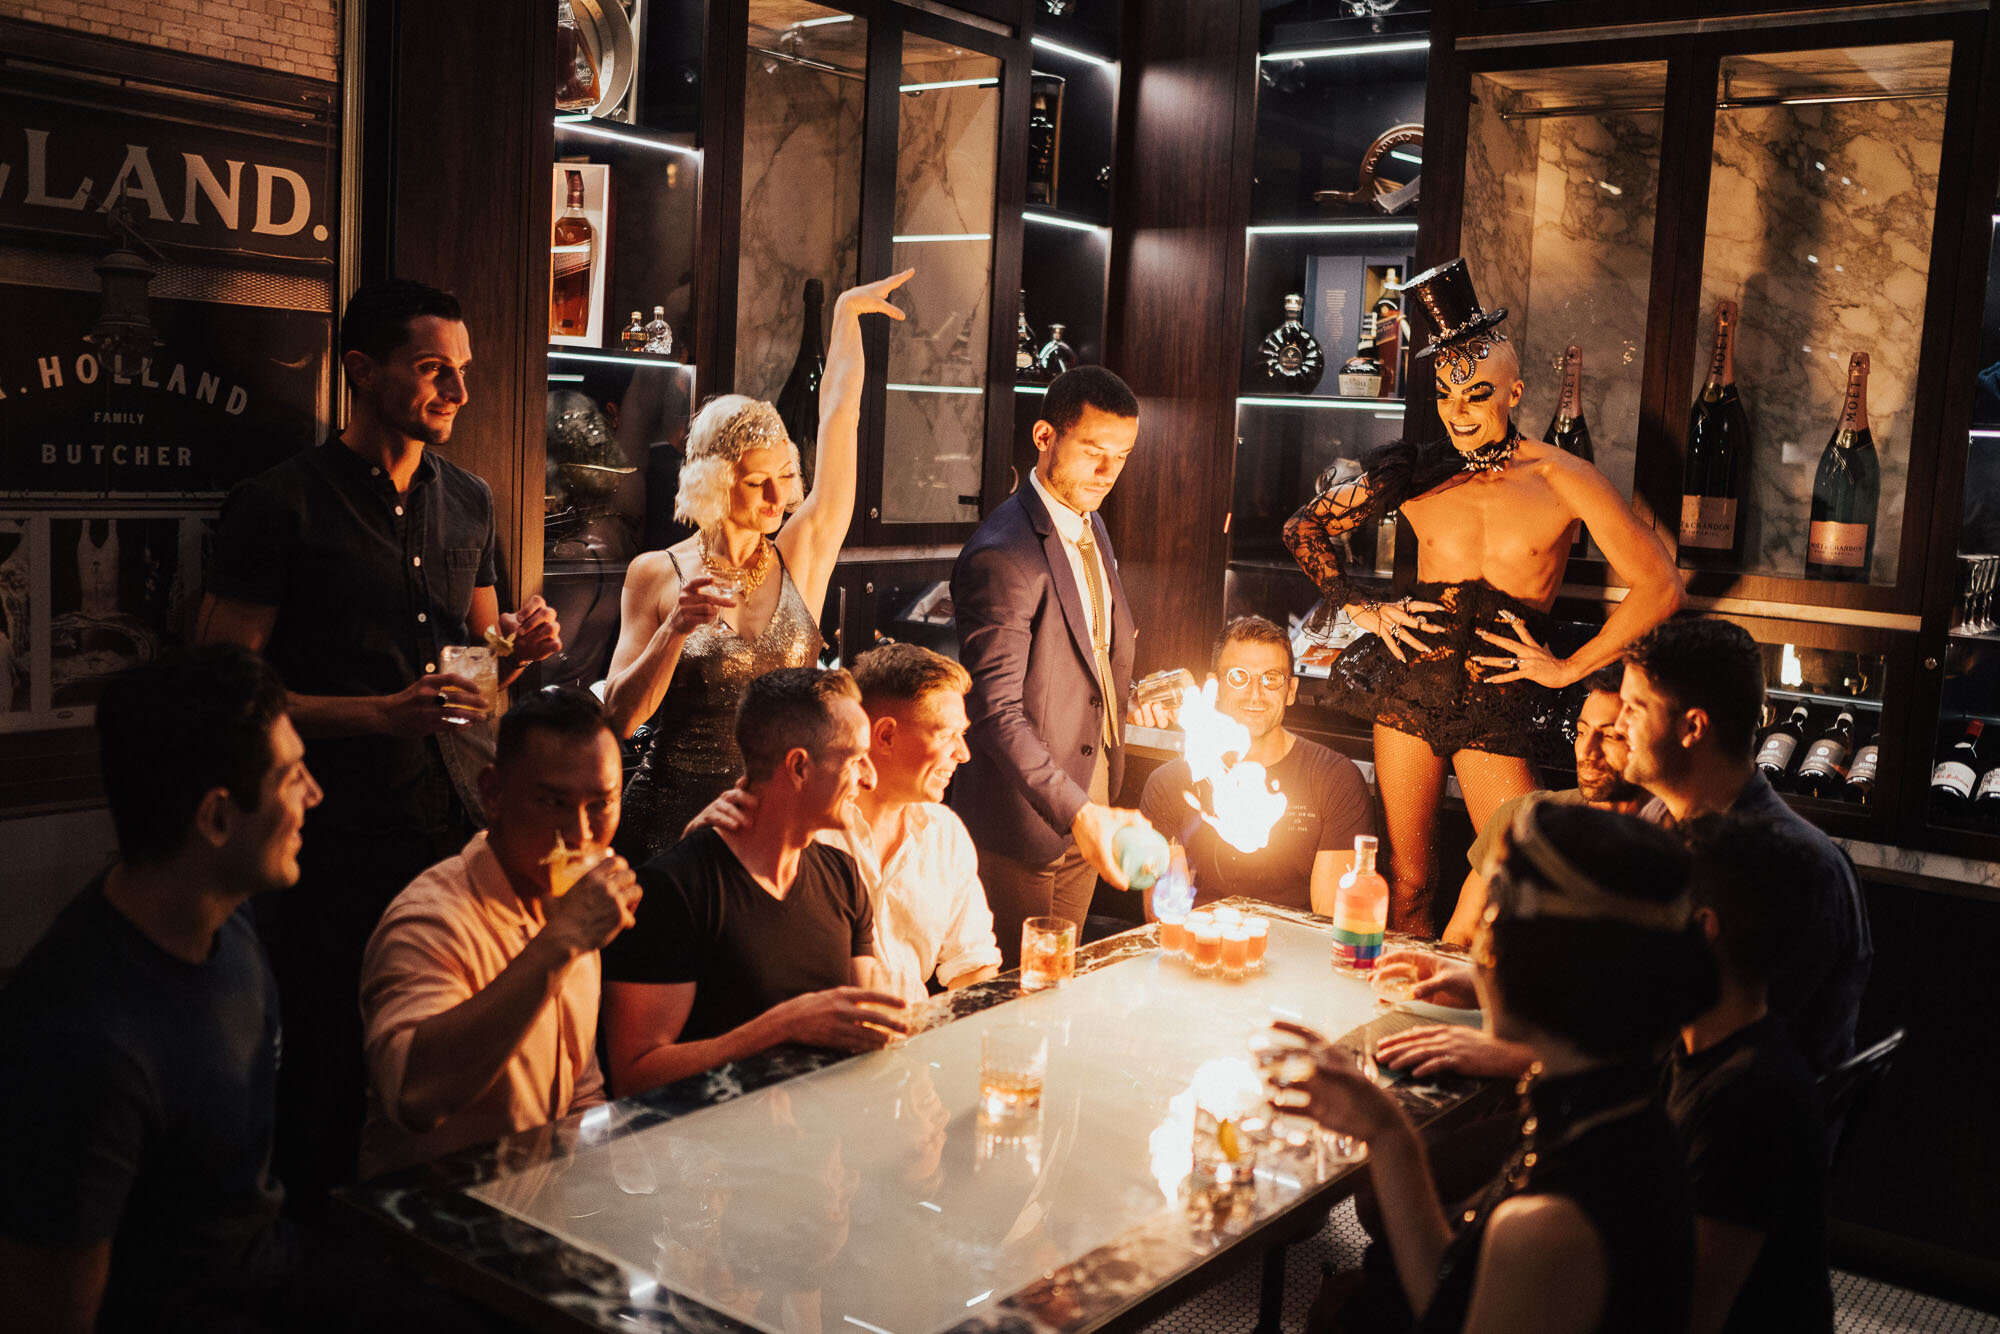 Photo of a birthday party with burlesque dancers and people celebrating with shots